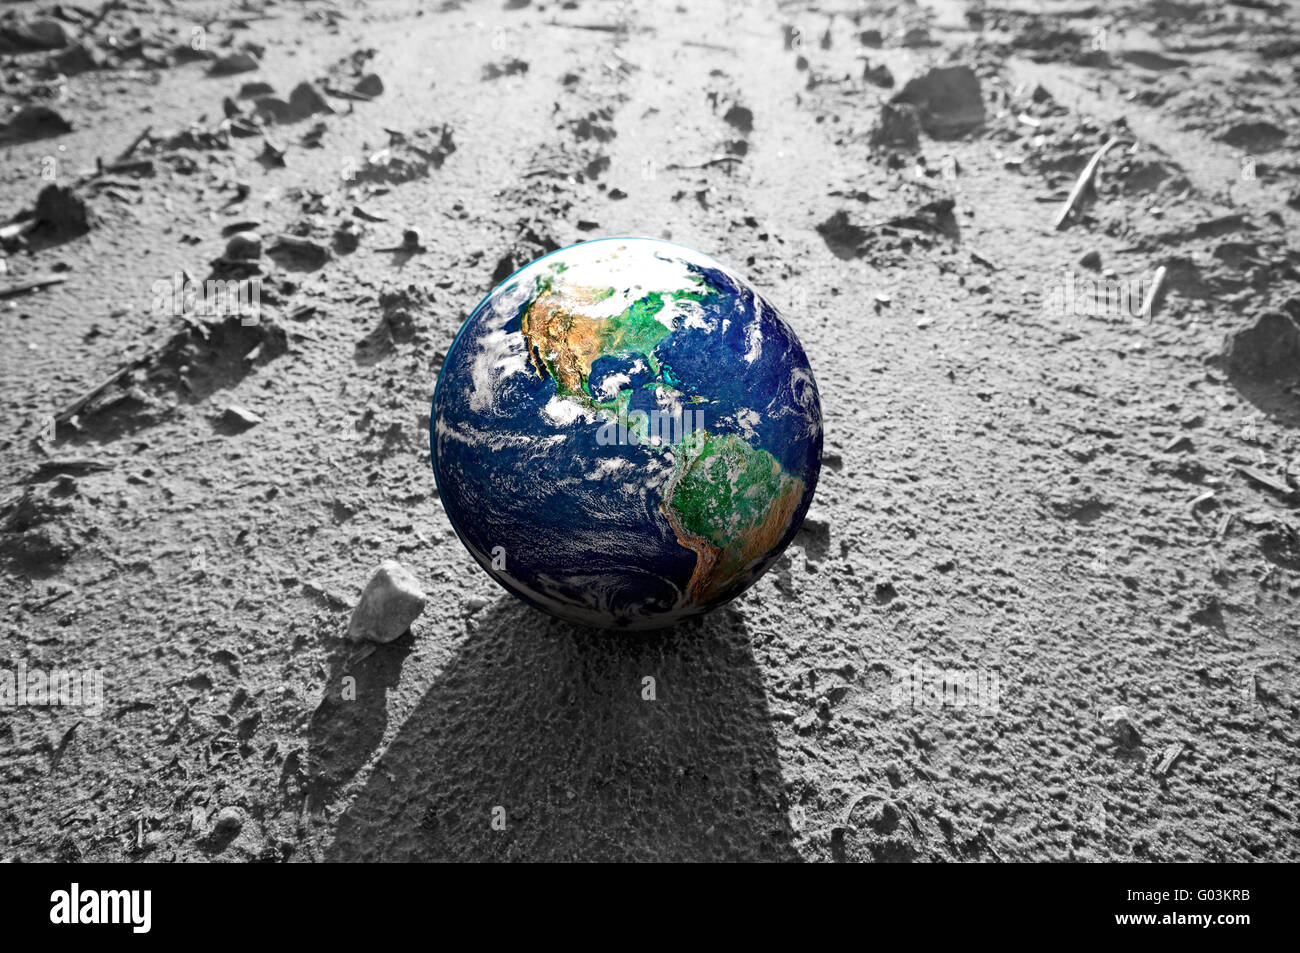 The Earth globe on rocky Mars like surface. Concepts of Earth protection Stock Photo